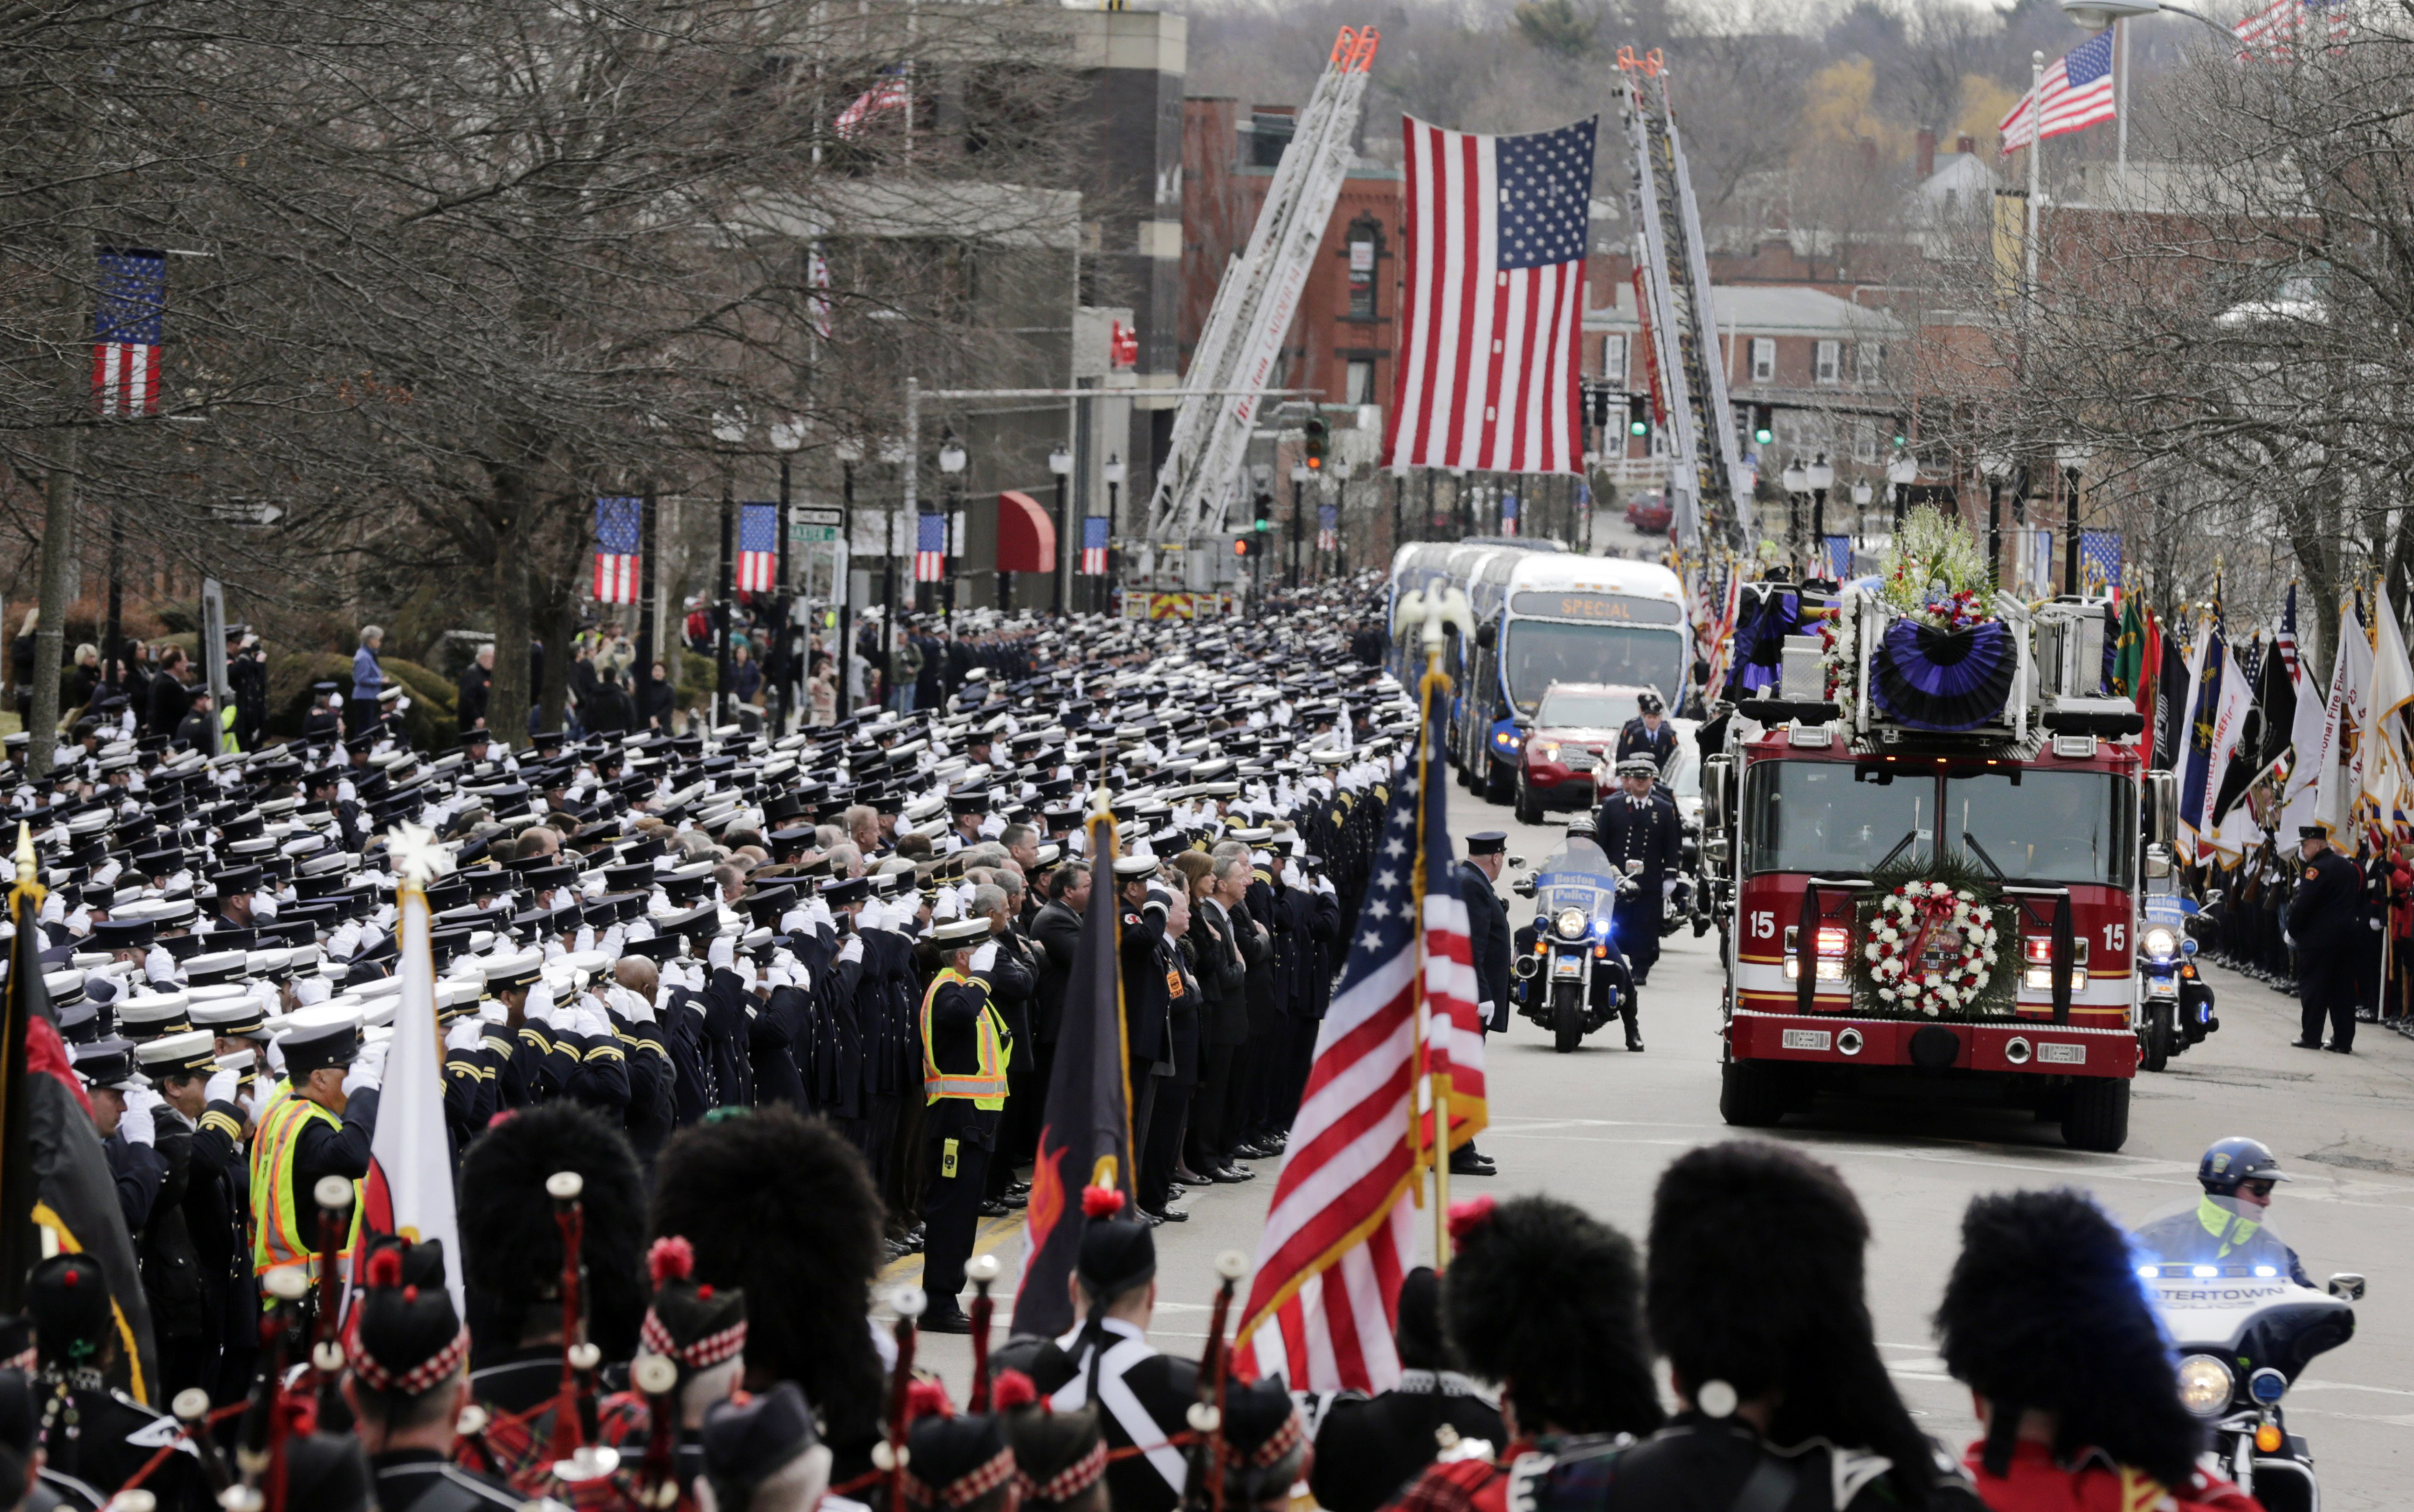 Firefighters salute as the funeral procession for Boston fire Lt. Edward Walsh arrives outside St. Patrick's Church in Watertown, Mass., Wednesday, April 2, 2014. Walsh and his colleague Michael Kennedy died after being trapped while battling a nine-alarm apartment fire in Boston on March 26. (AP Photo/Charles Krupa)